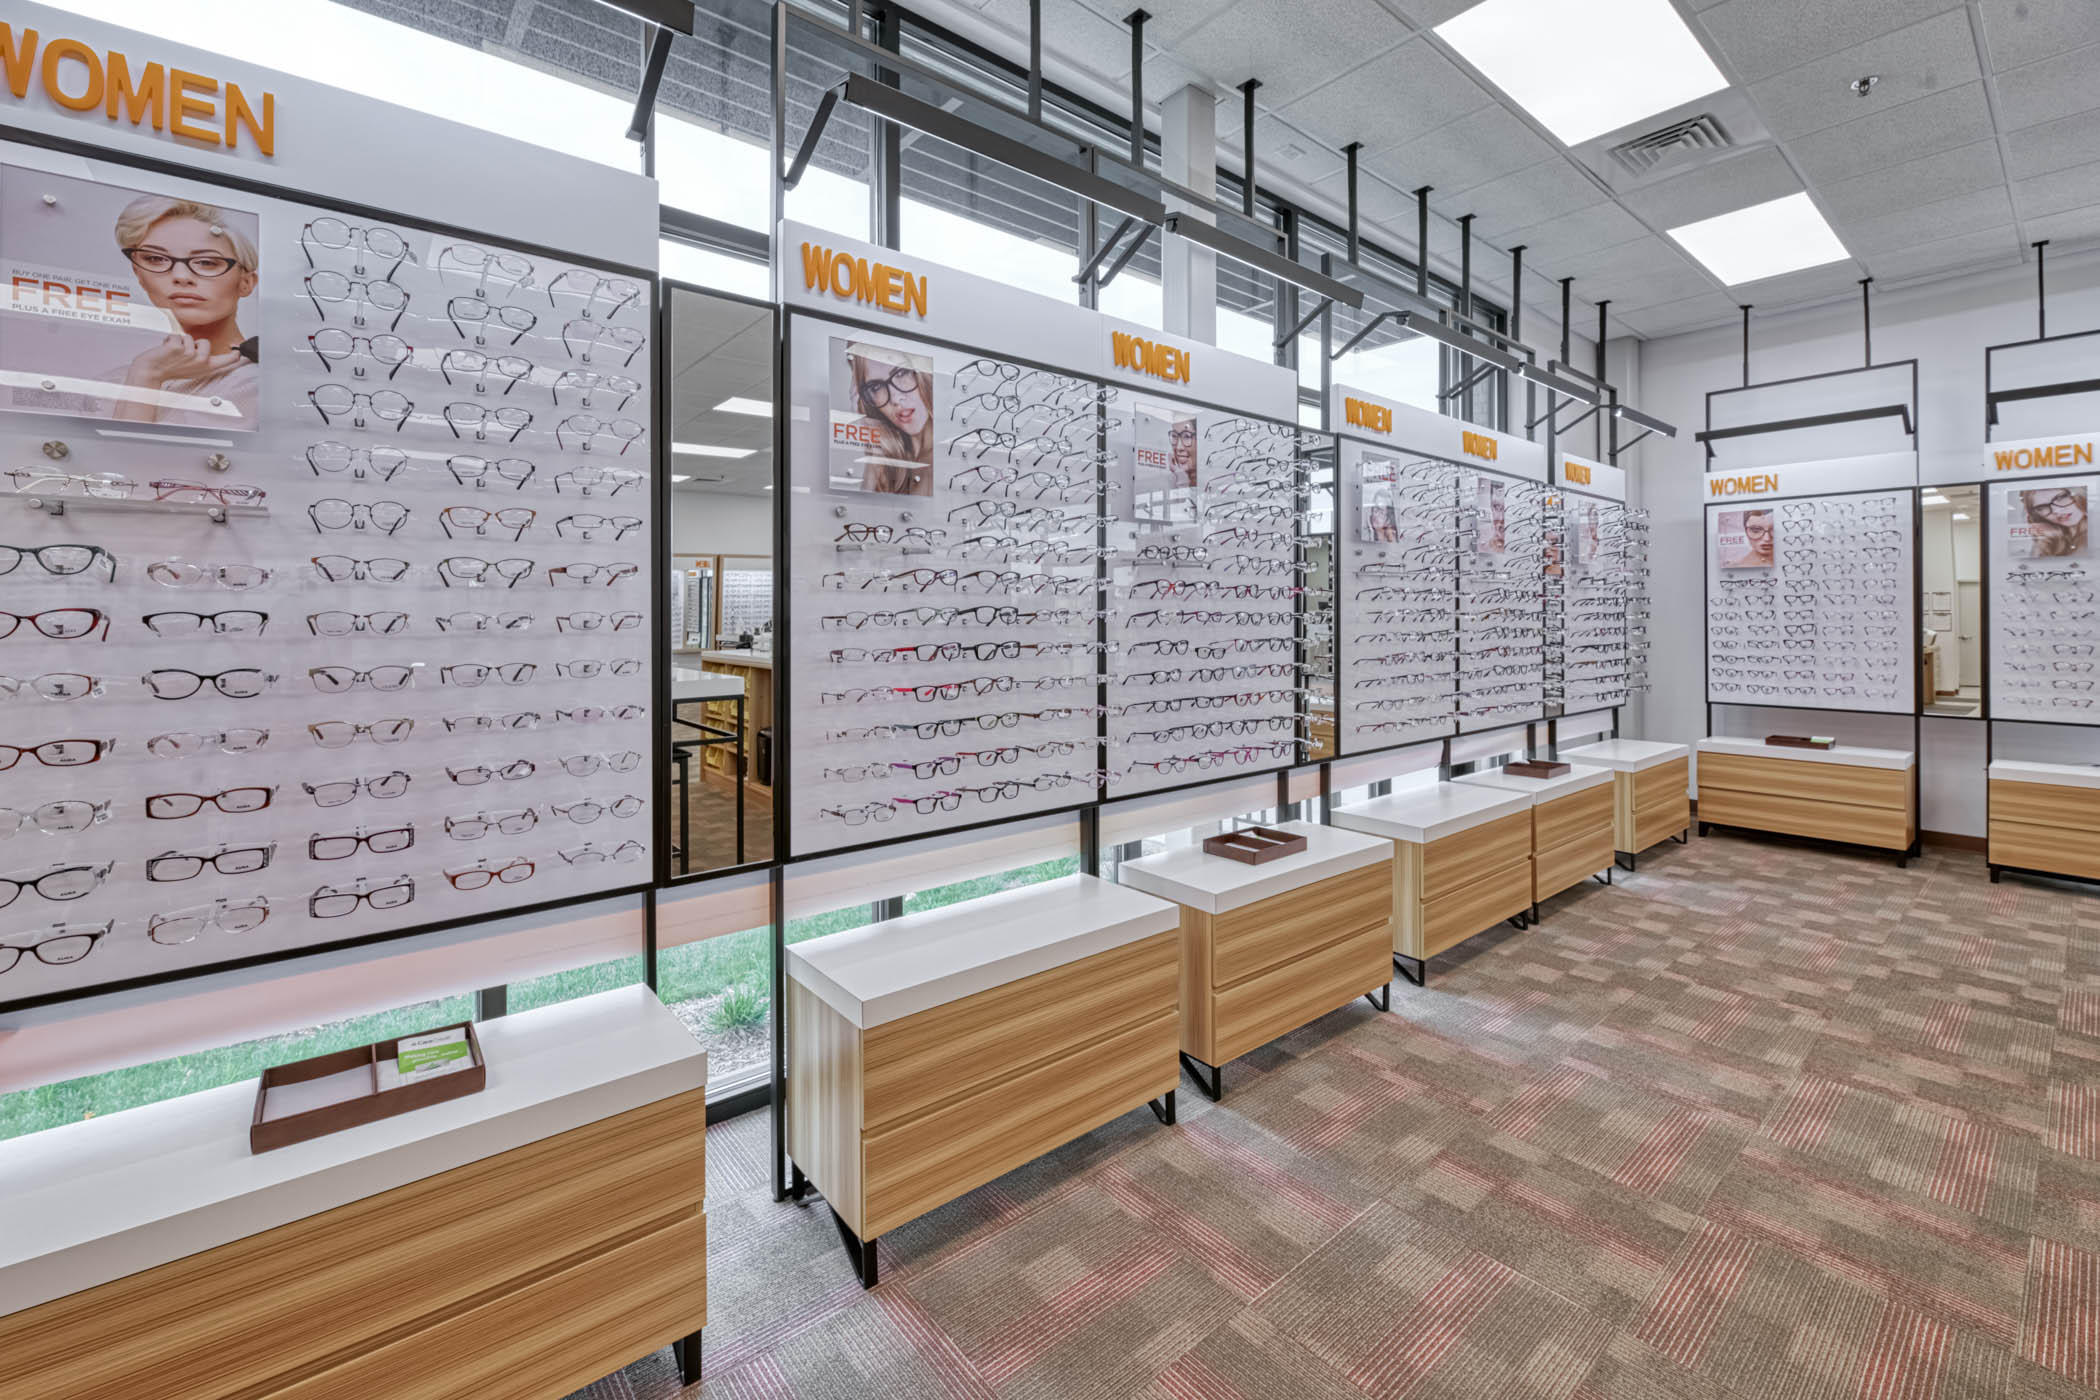 Eyeglasses for sale at Stanton Optical store in Oak Creek, WI 53154 Stanton Optical Oak Creek (414)928-4701